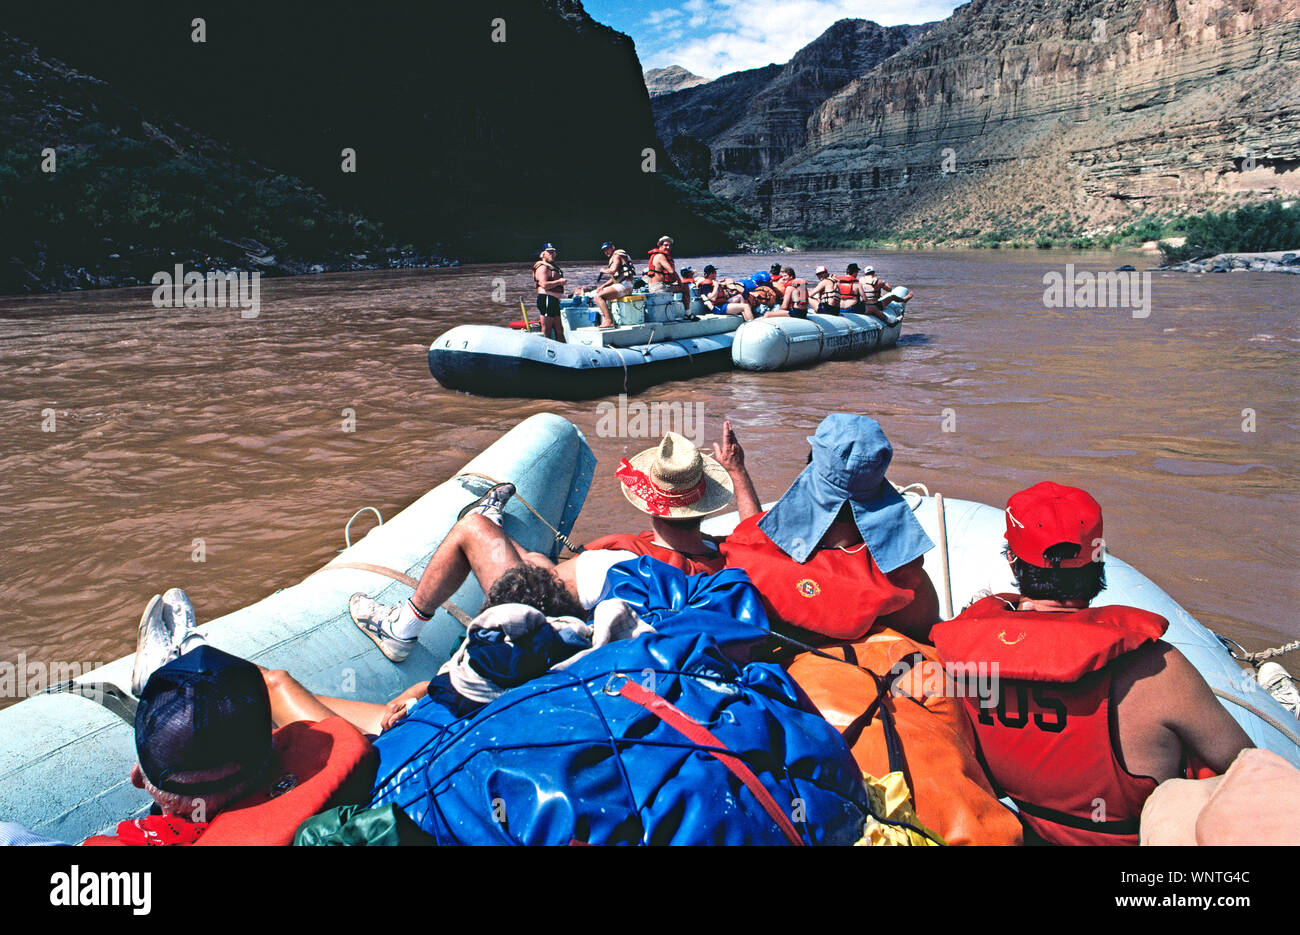 Two large neoprene rafts float down the muddy Colorado River on adventure trip that runs through Grand Canyon National Park in Arizona, USA. Each of the outboard motor-powered boats carries up to 14 passengers and two crew members plus food and camping supplies for 3-1/2 to 8-day outings that wind from 88 to 188 miles (142 to 303 kilometers) through the famous river canyon. The longer the trip, the more thrills through water-splashing rapids along the way; life jackets are provided. An option are oar-powered rafting trips that take 5-1/2 to 14 days to cover the same motor-powered distances. Stock Photo